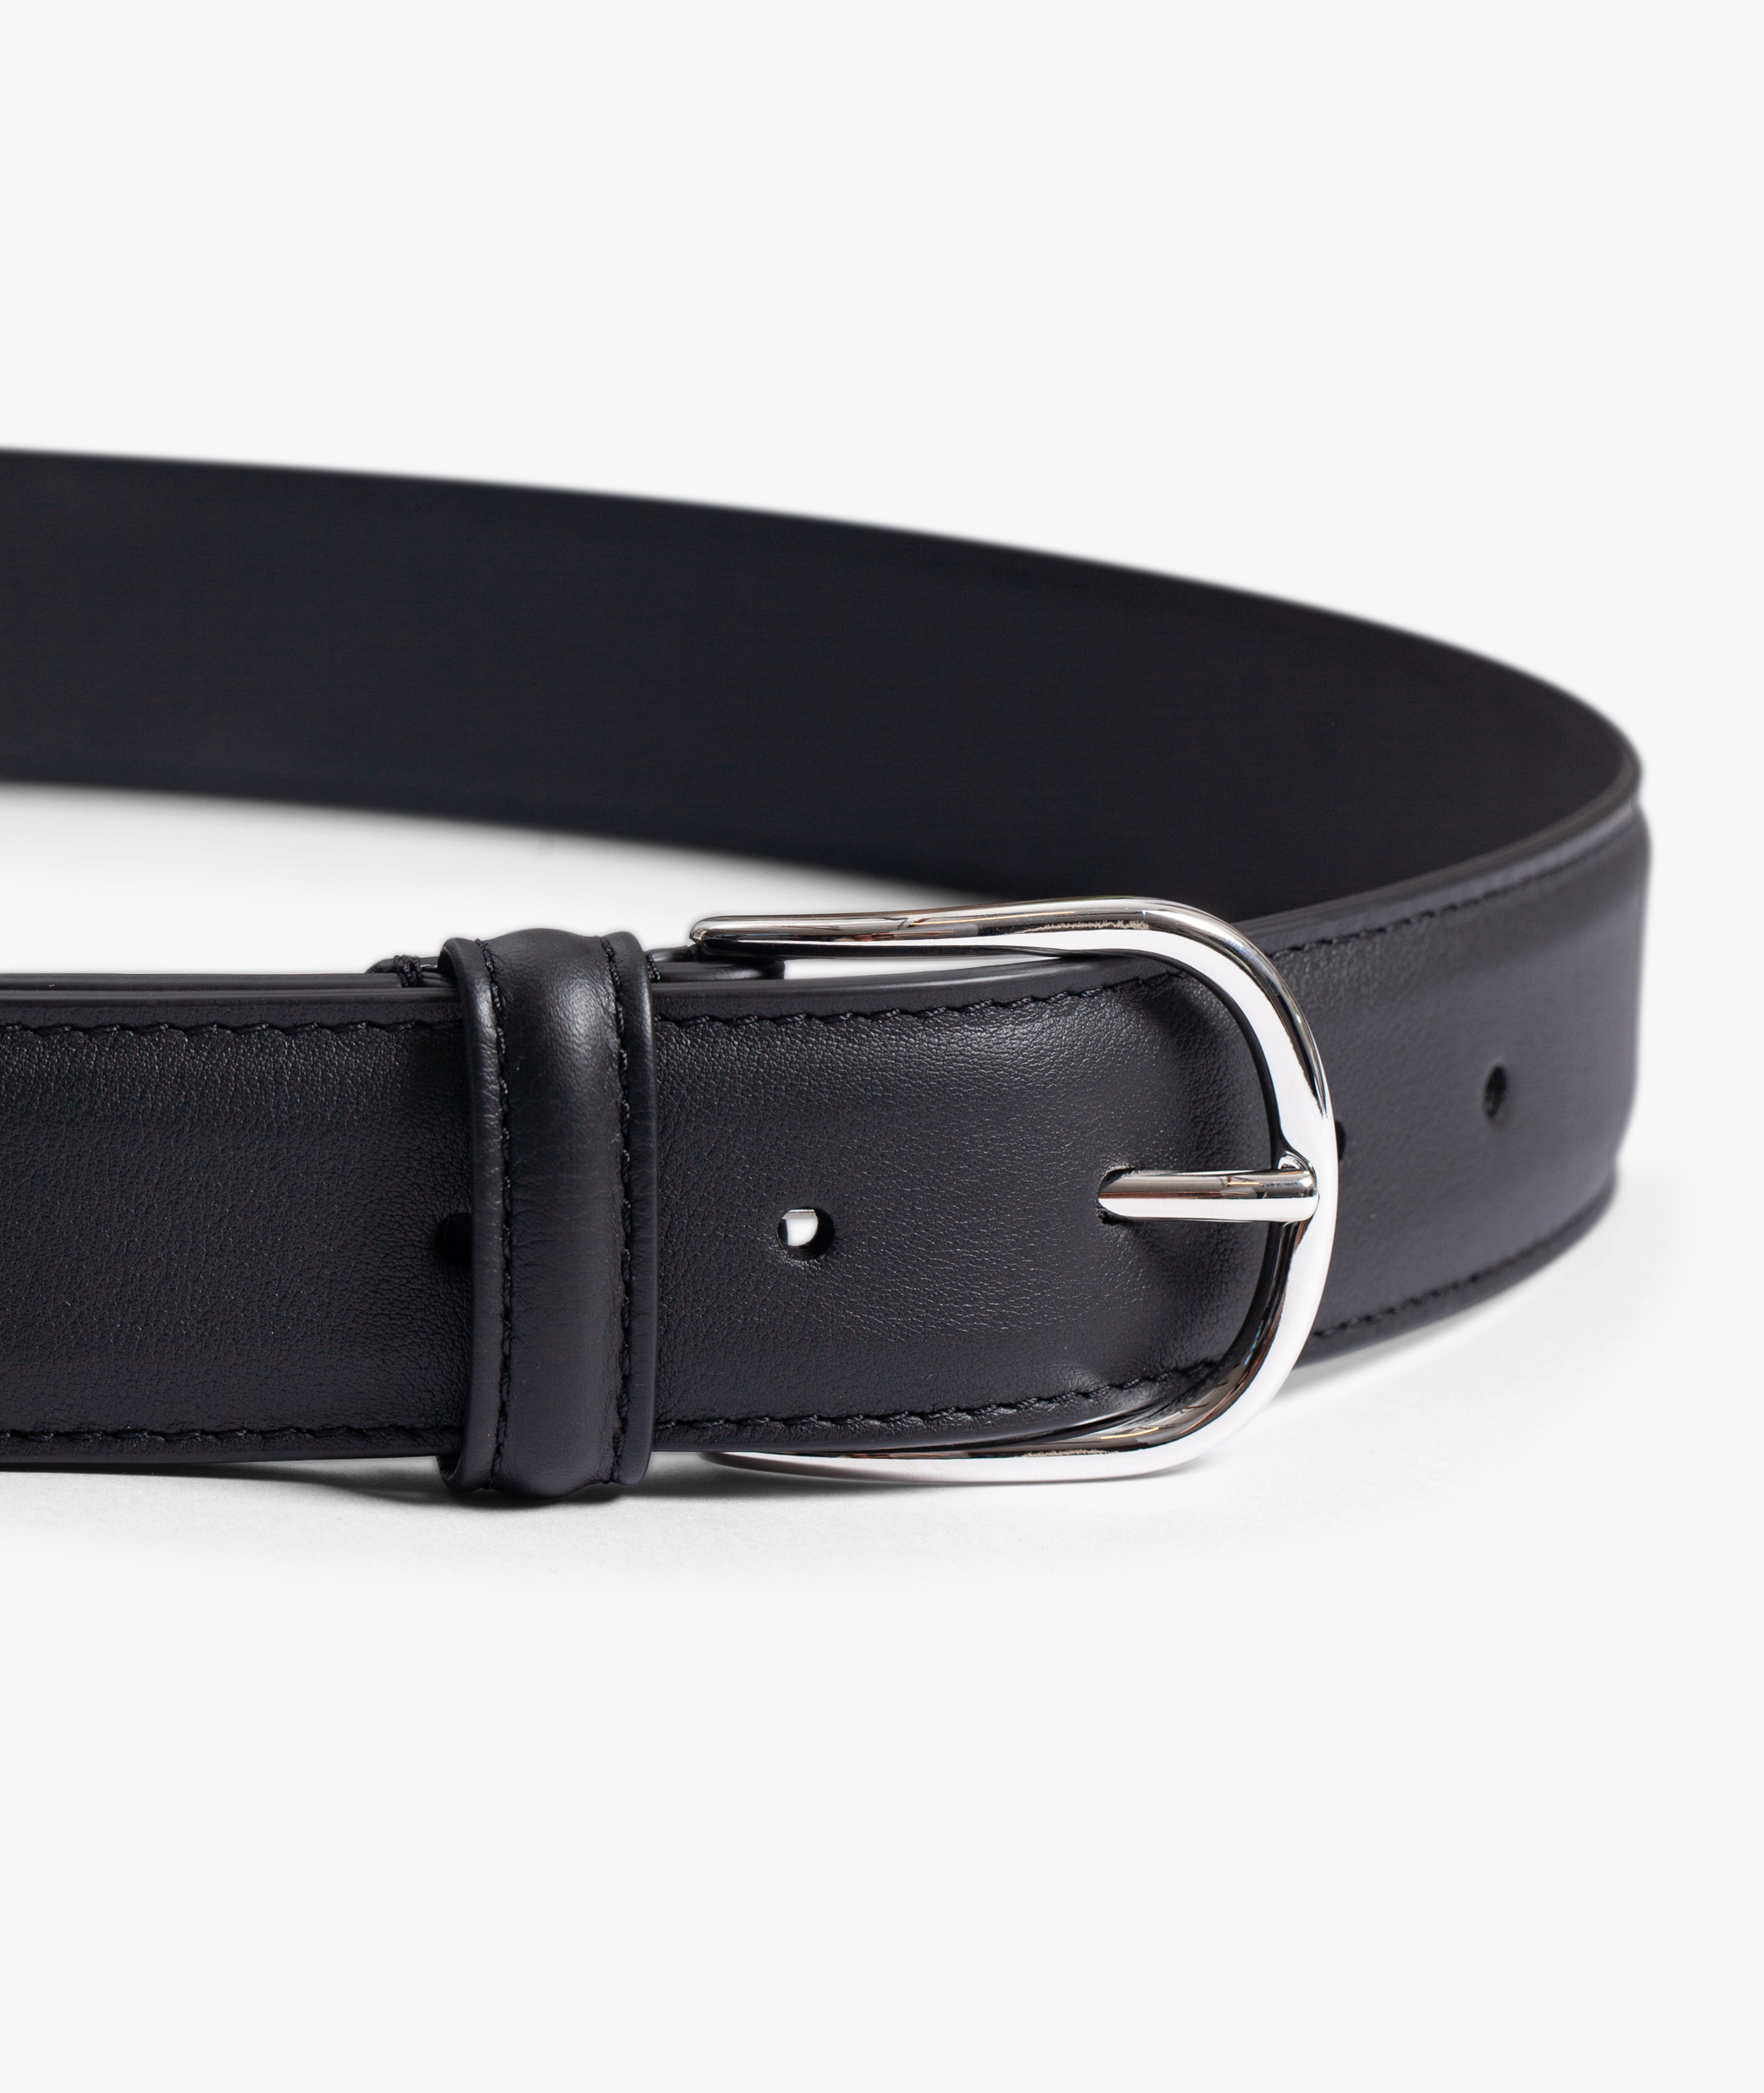 https://www.norsestore.com/shared/163/384/andersons-classic-leather-belt-round-buckle_u.jpg